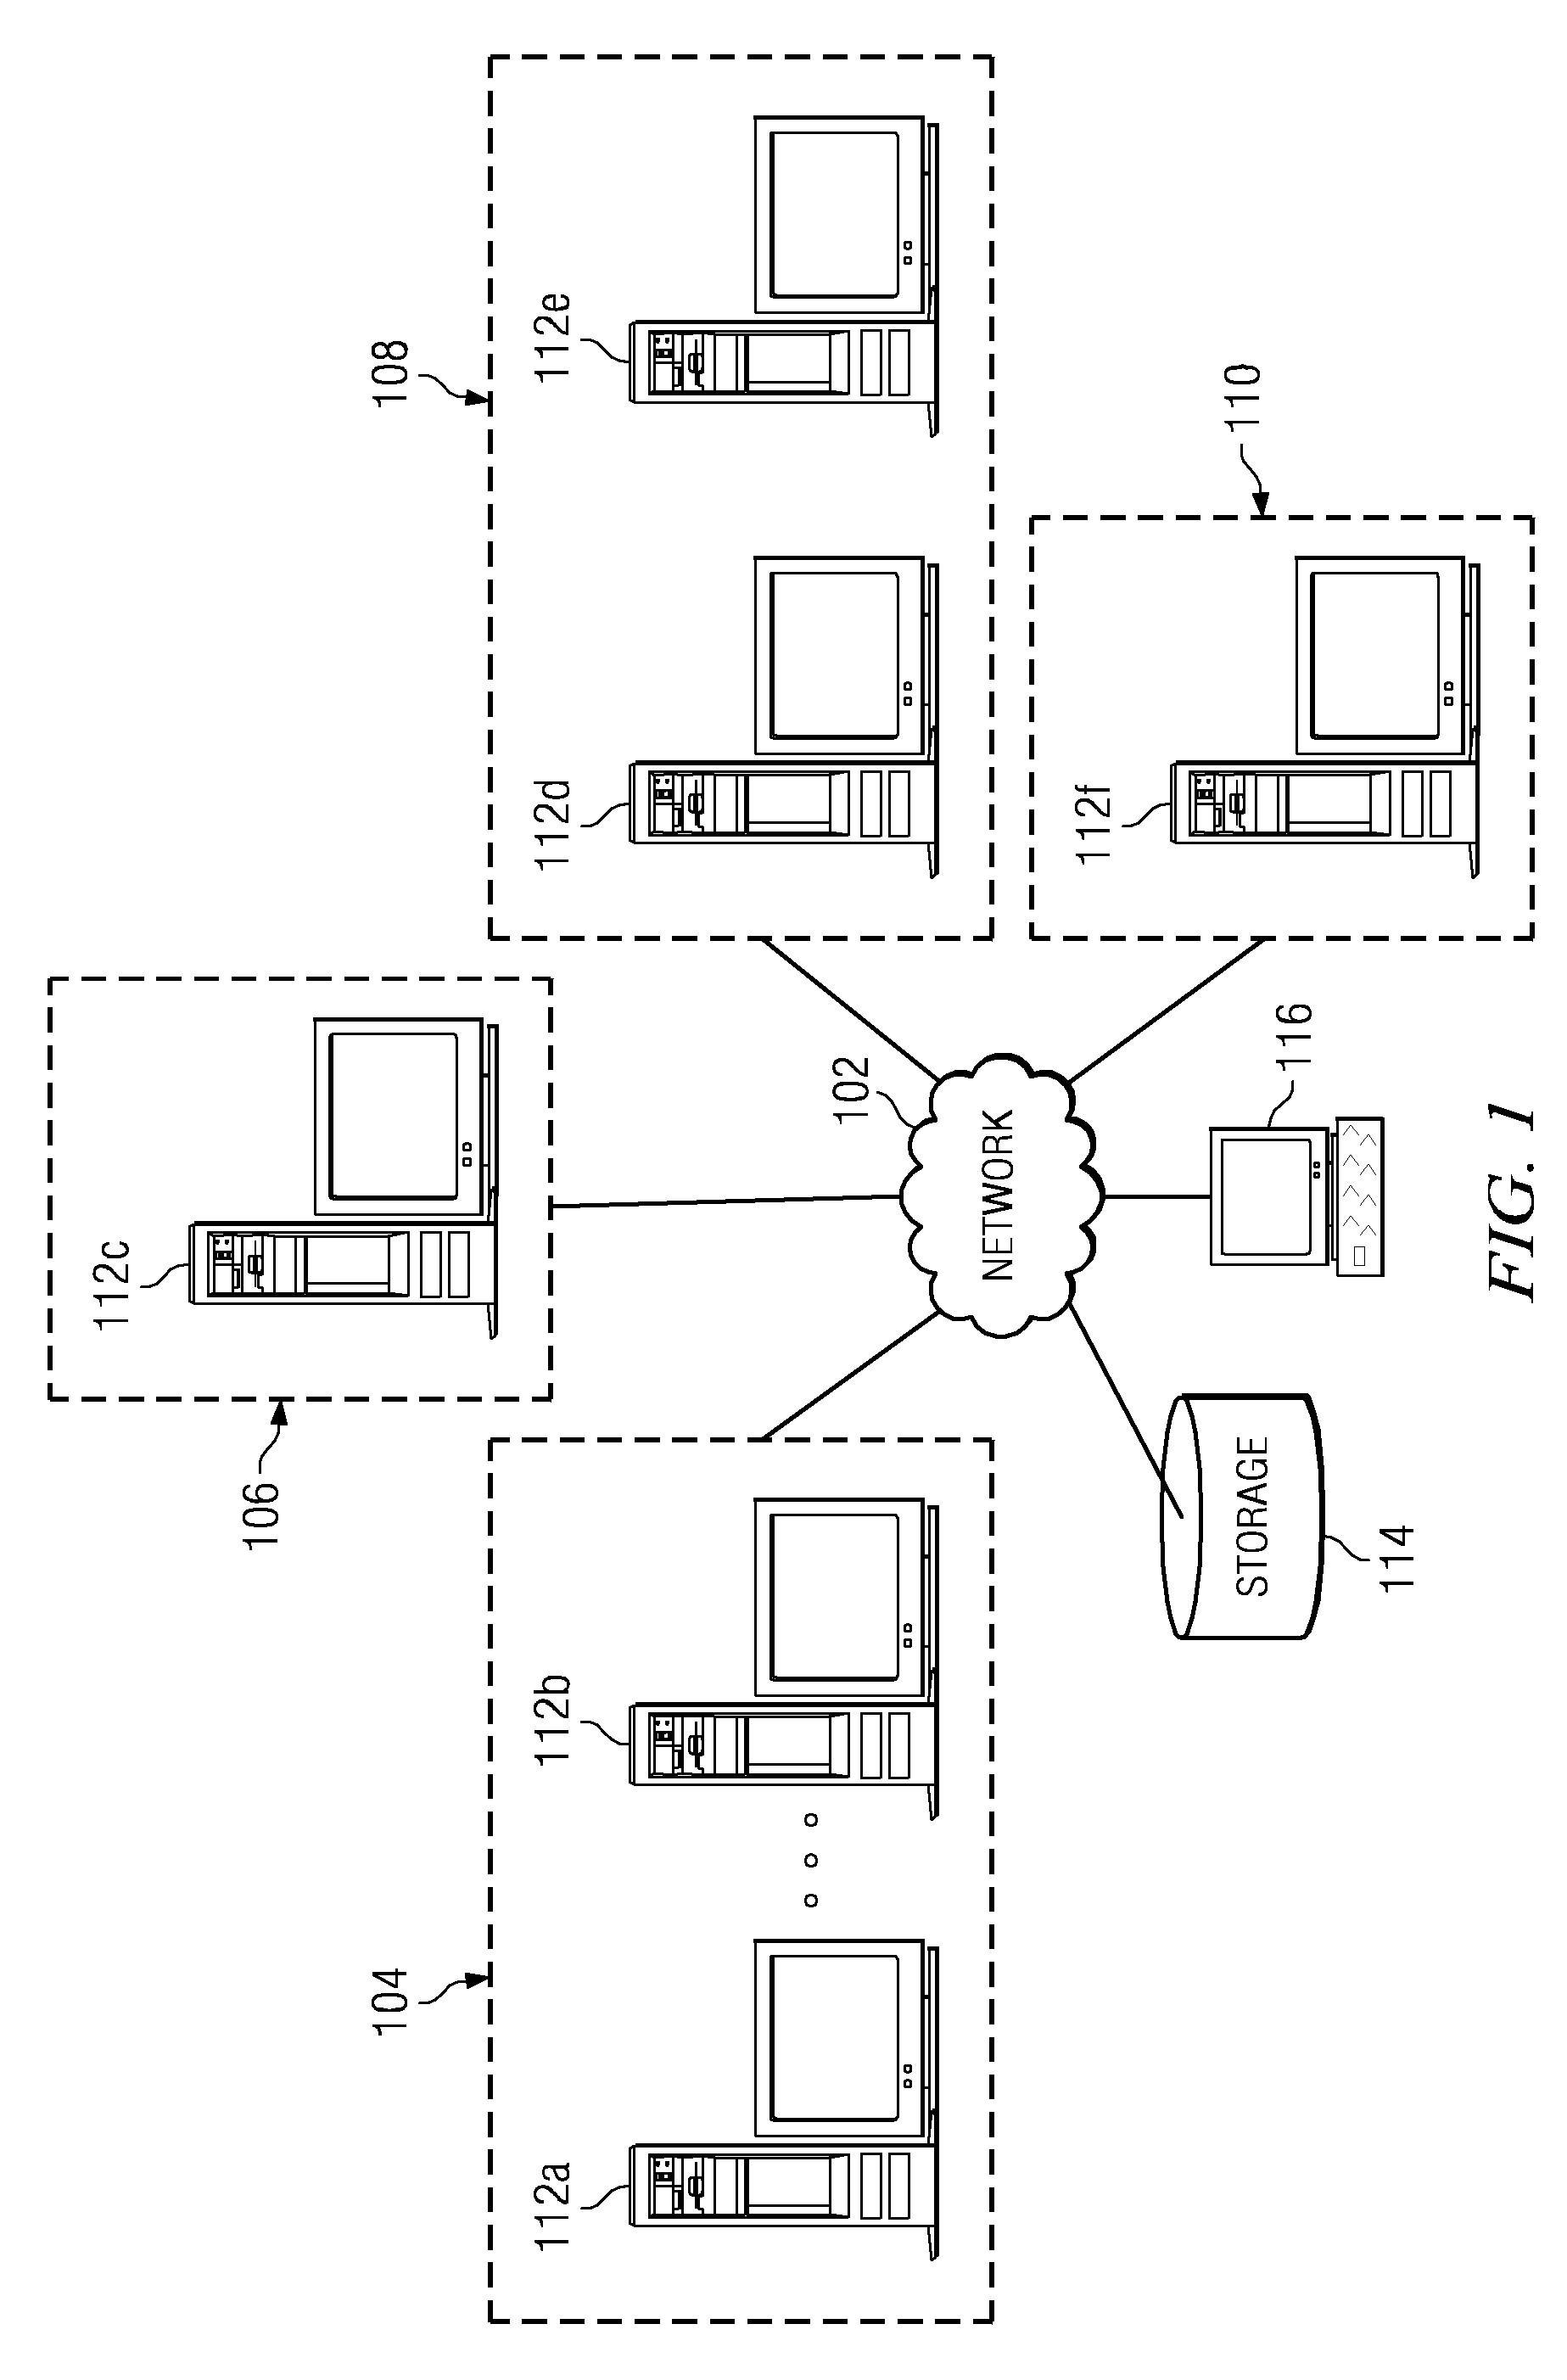 Method for determining priority for installing a patch into multiple patch recipients of a network